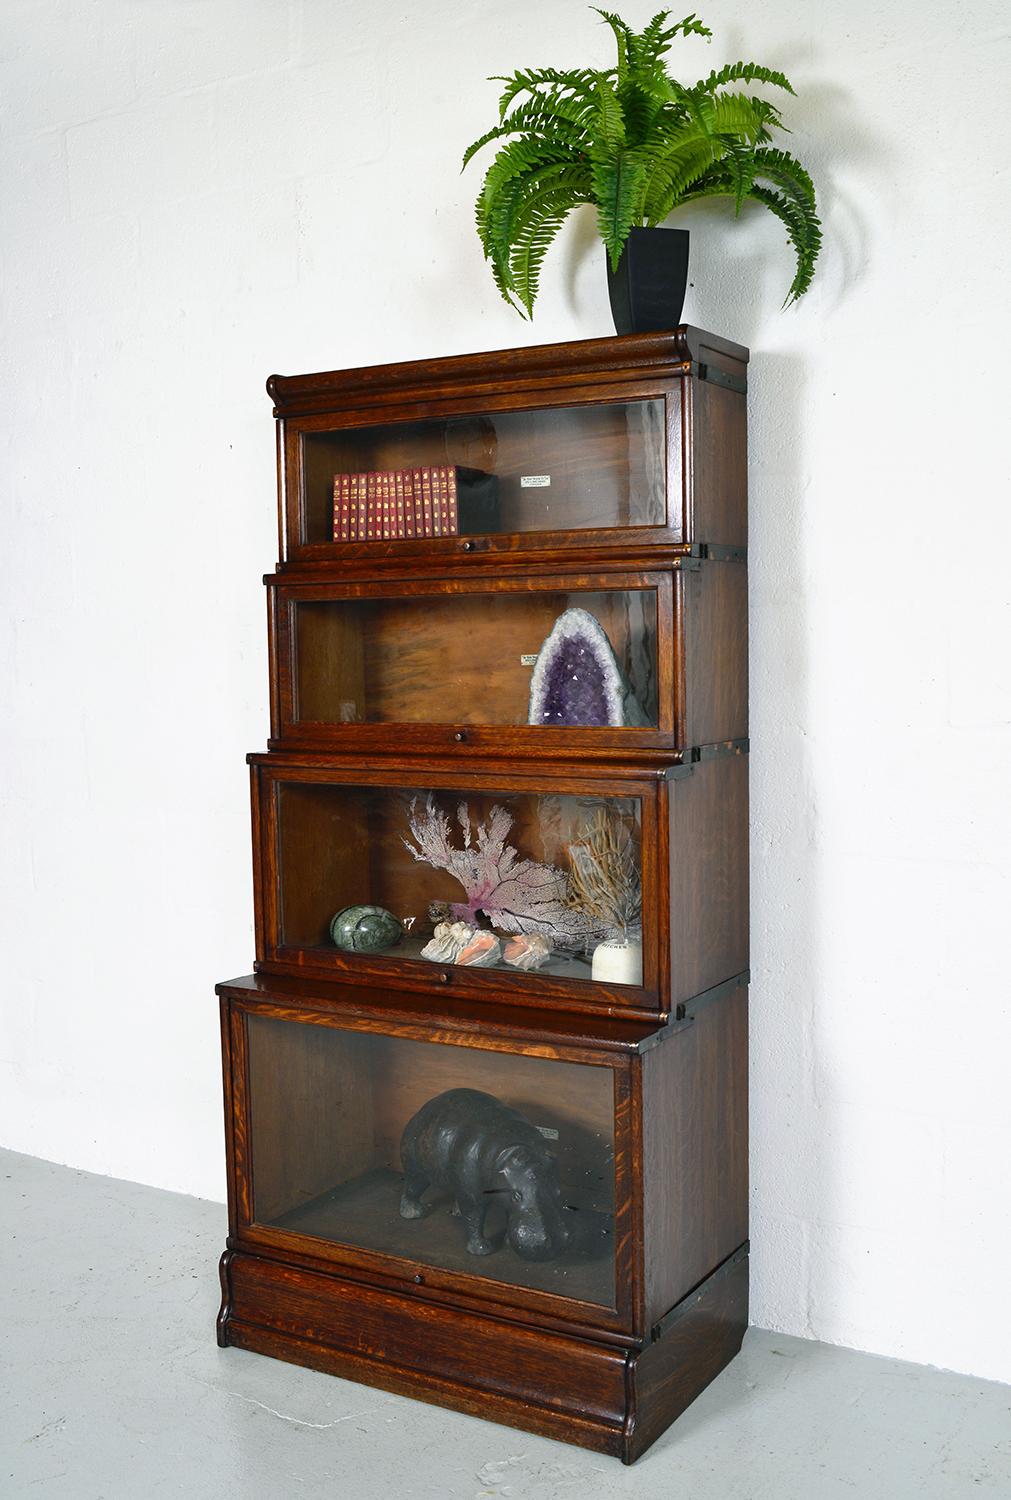 20th Century 4 Antique Globe Wernicke Oak Glass Stacking Library Barrister Modular Bookcase